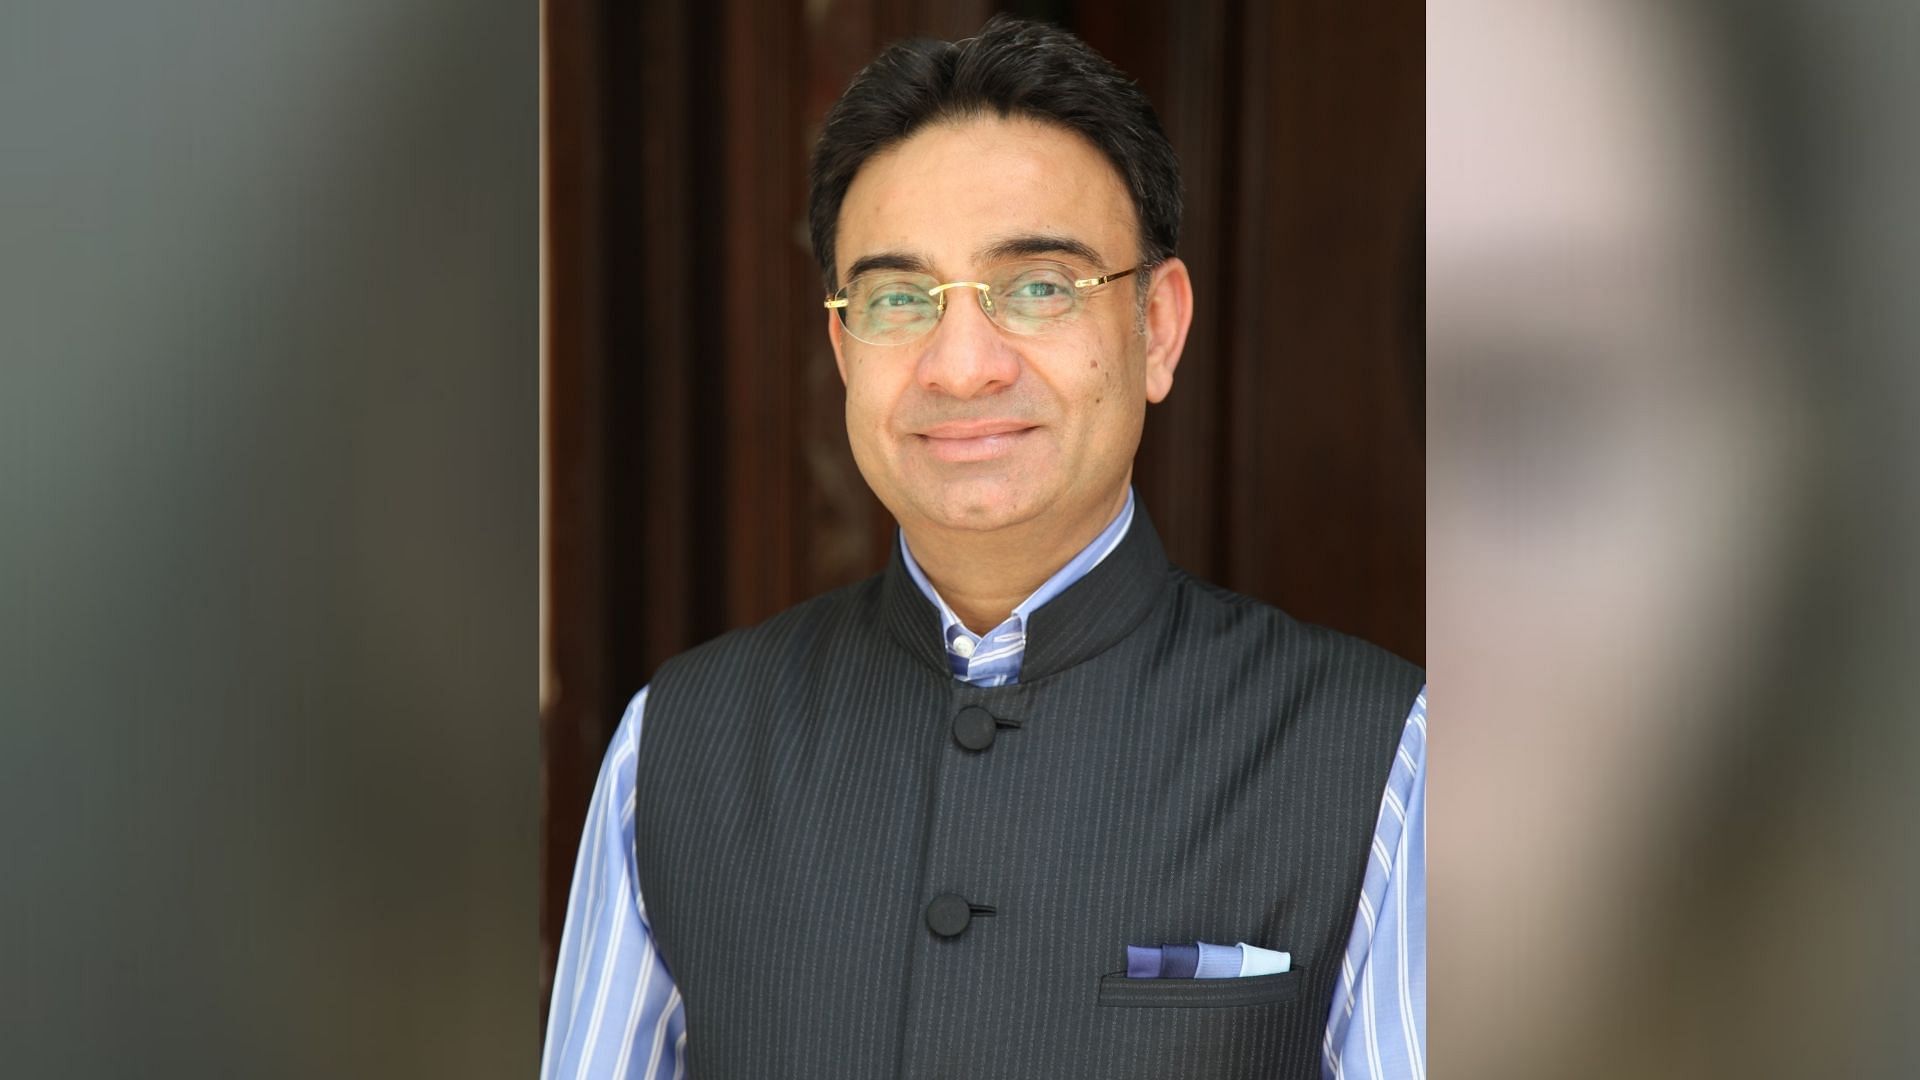 ED arrested former Trinamool Congress (TMC) Rajya Sabha MP and businessman KD Singh in connection with an alleged money laundering case.